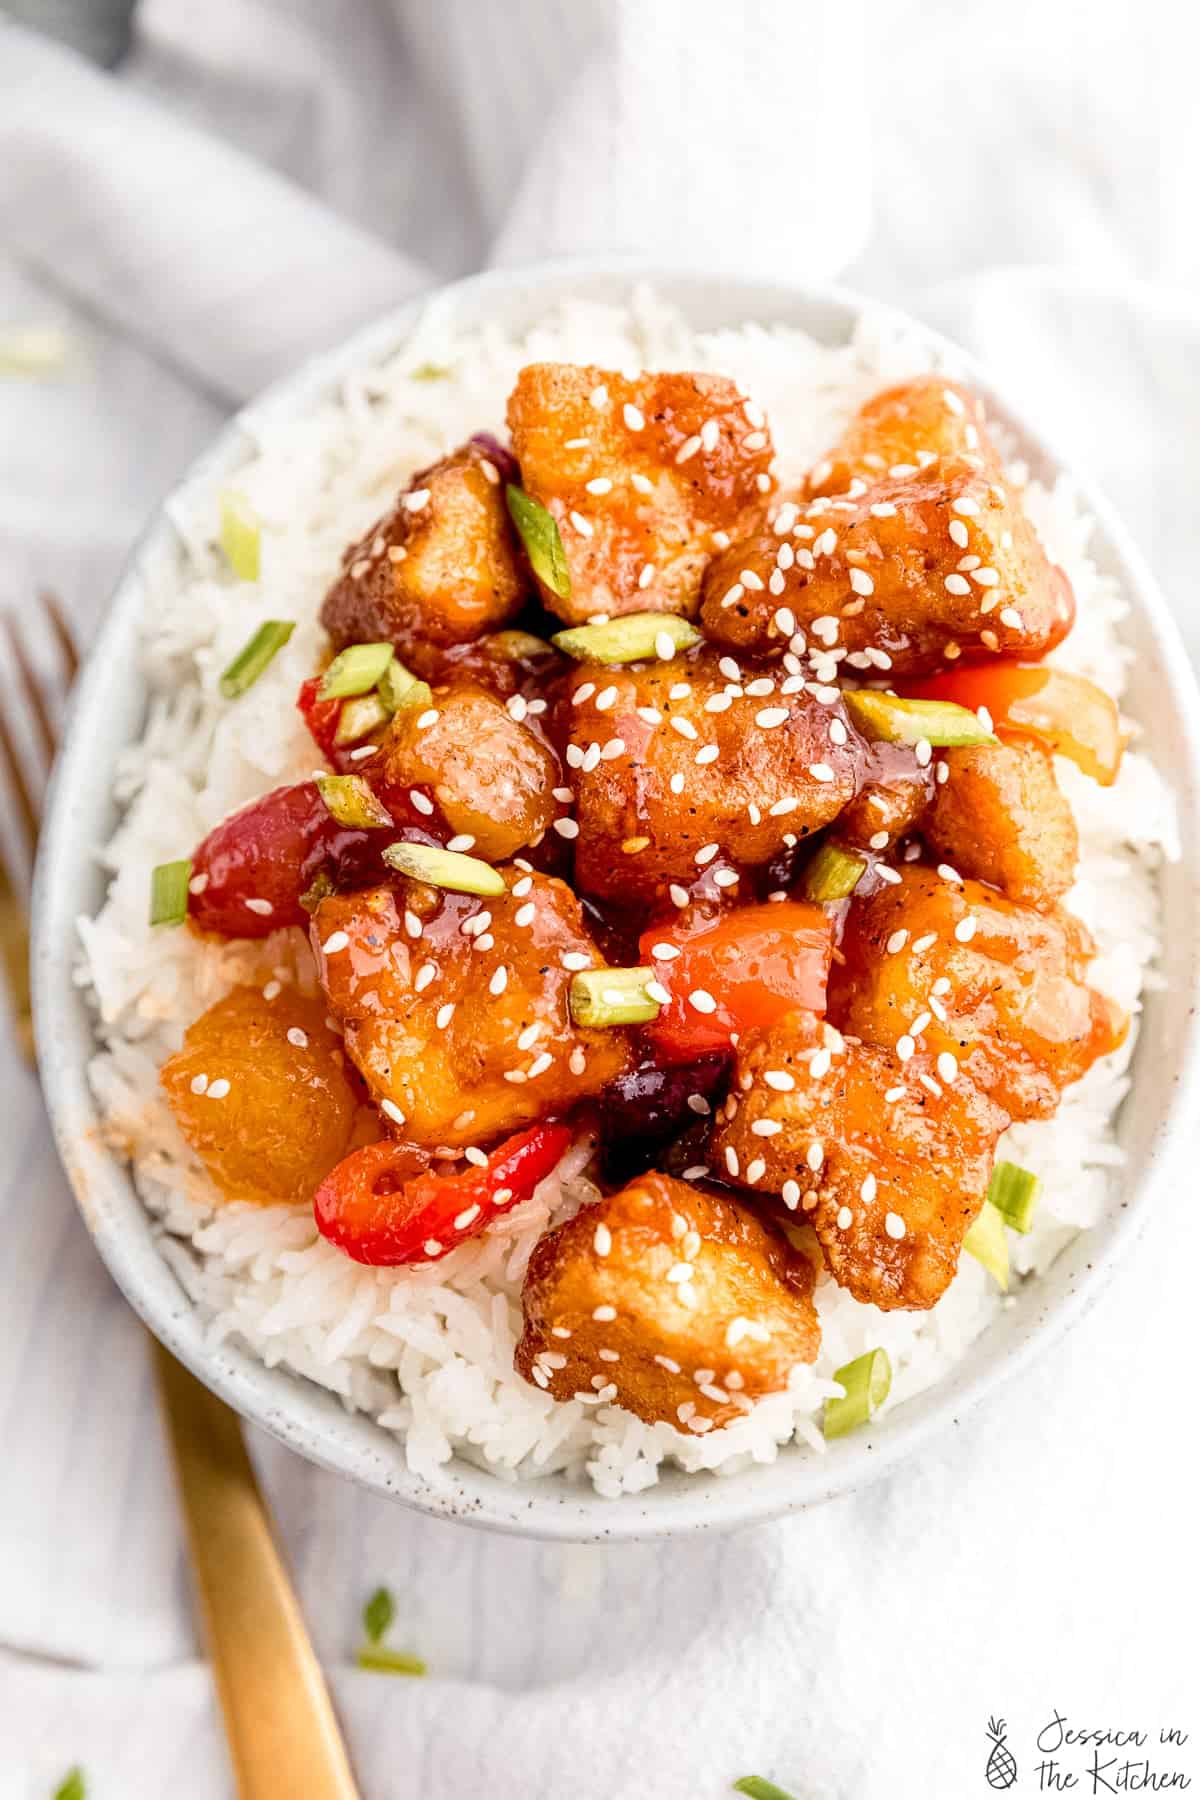 A plate of vegan sweet and sour tofu